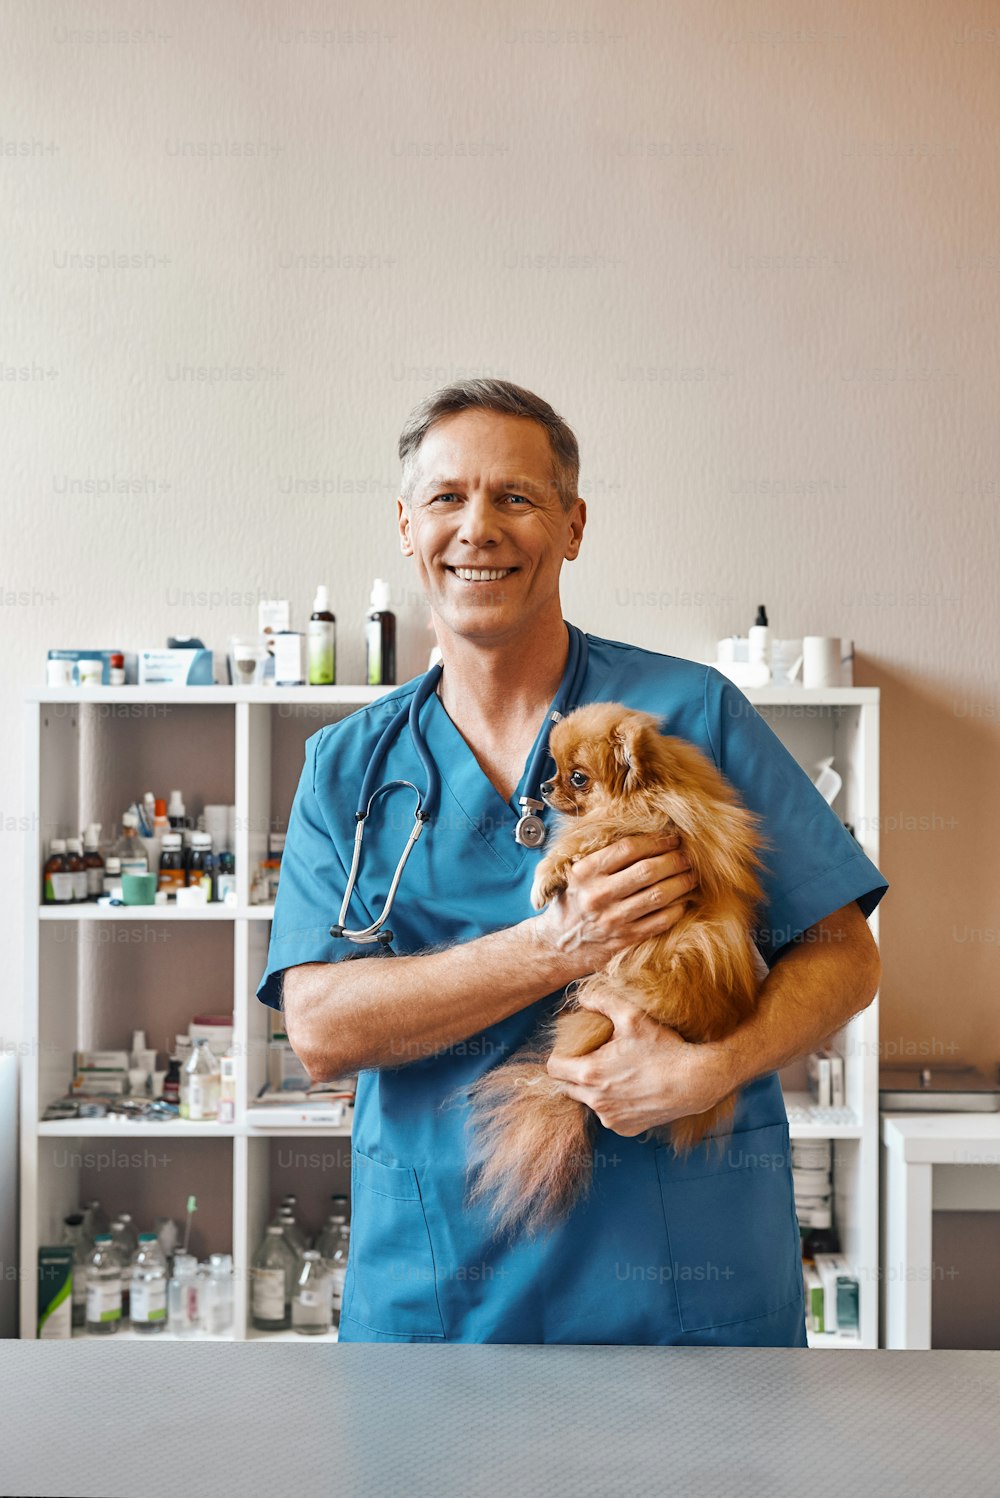 Checkup day. Cheerful and kind middle aged vet holding small ginger dog and looking at camera with smile while standing at veterinary clinic. Medicine concept. Pet care concept. Animal hospital